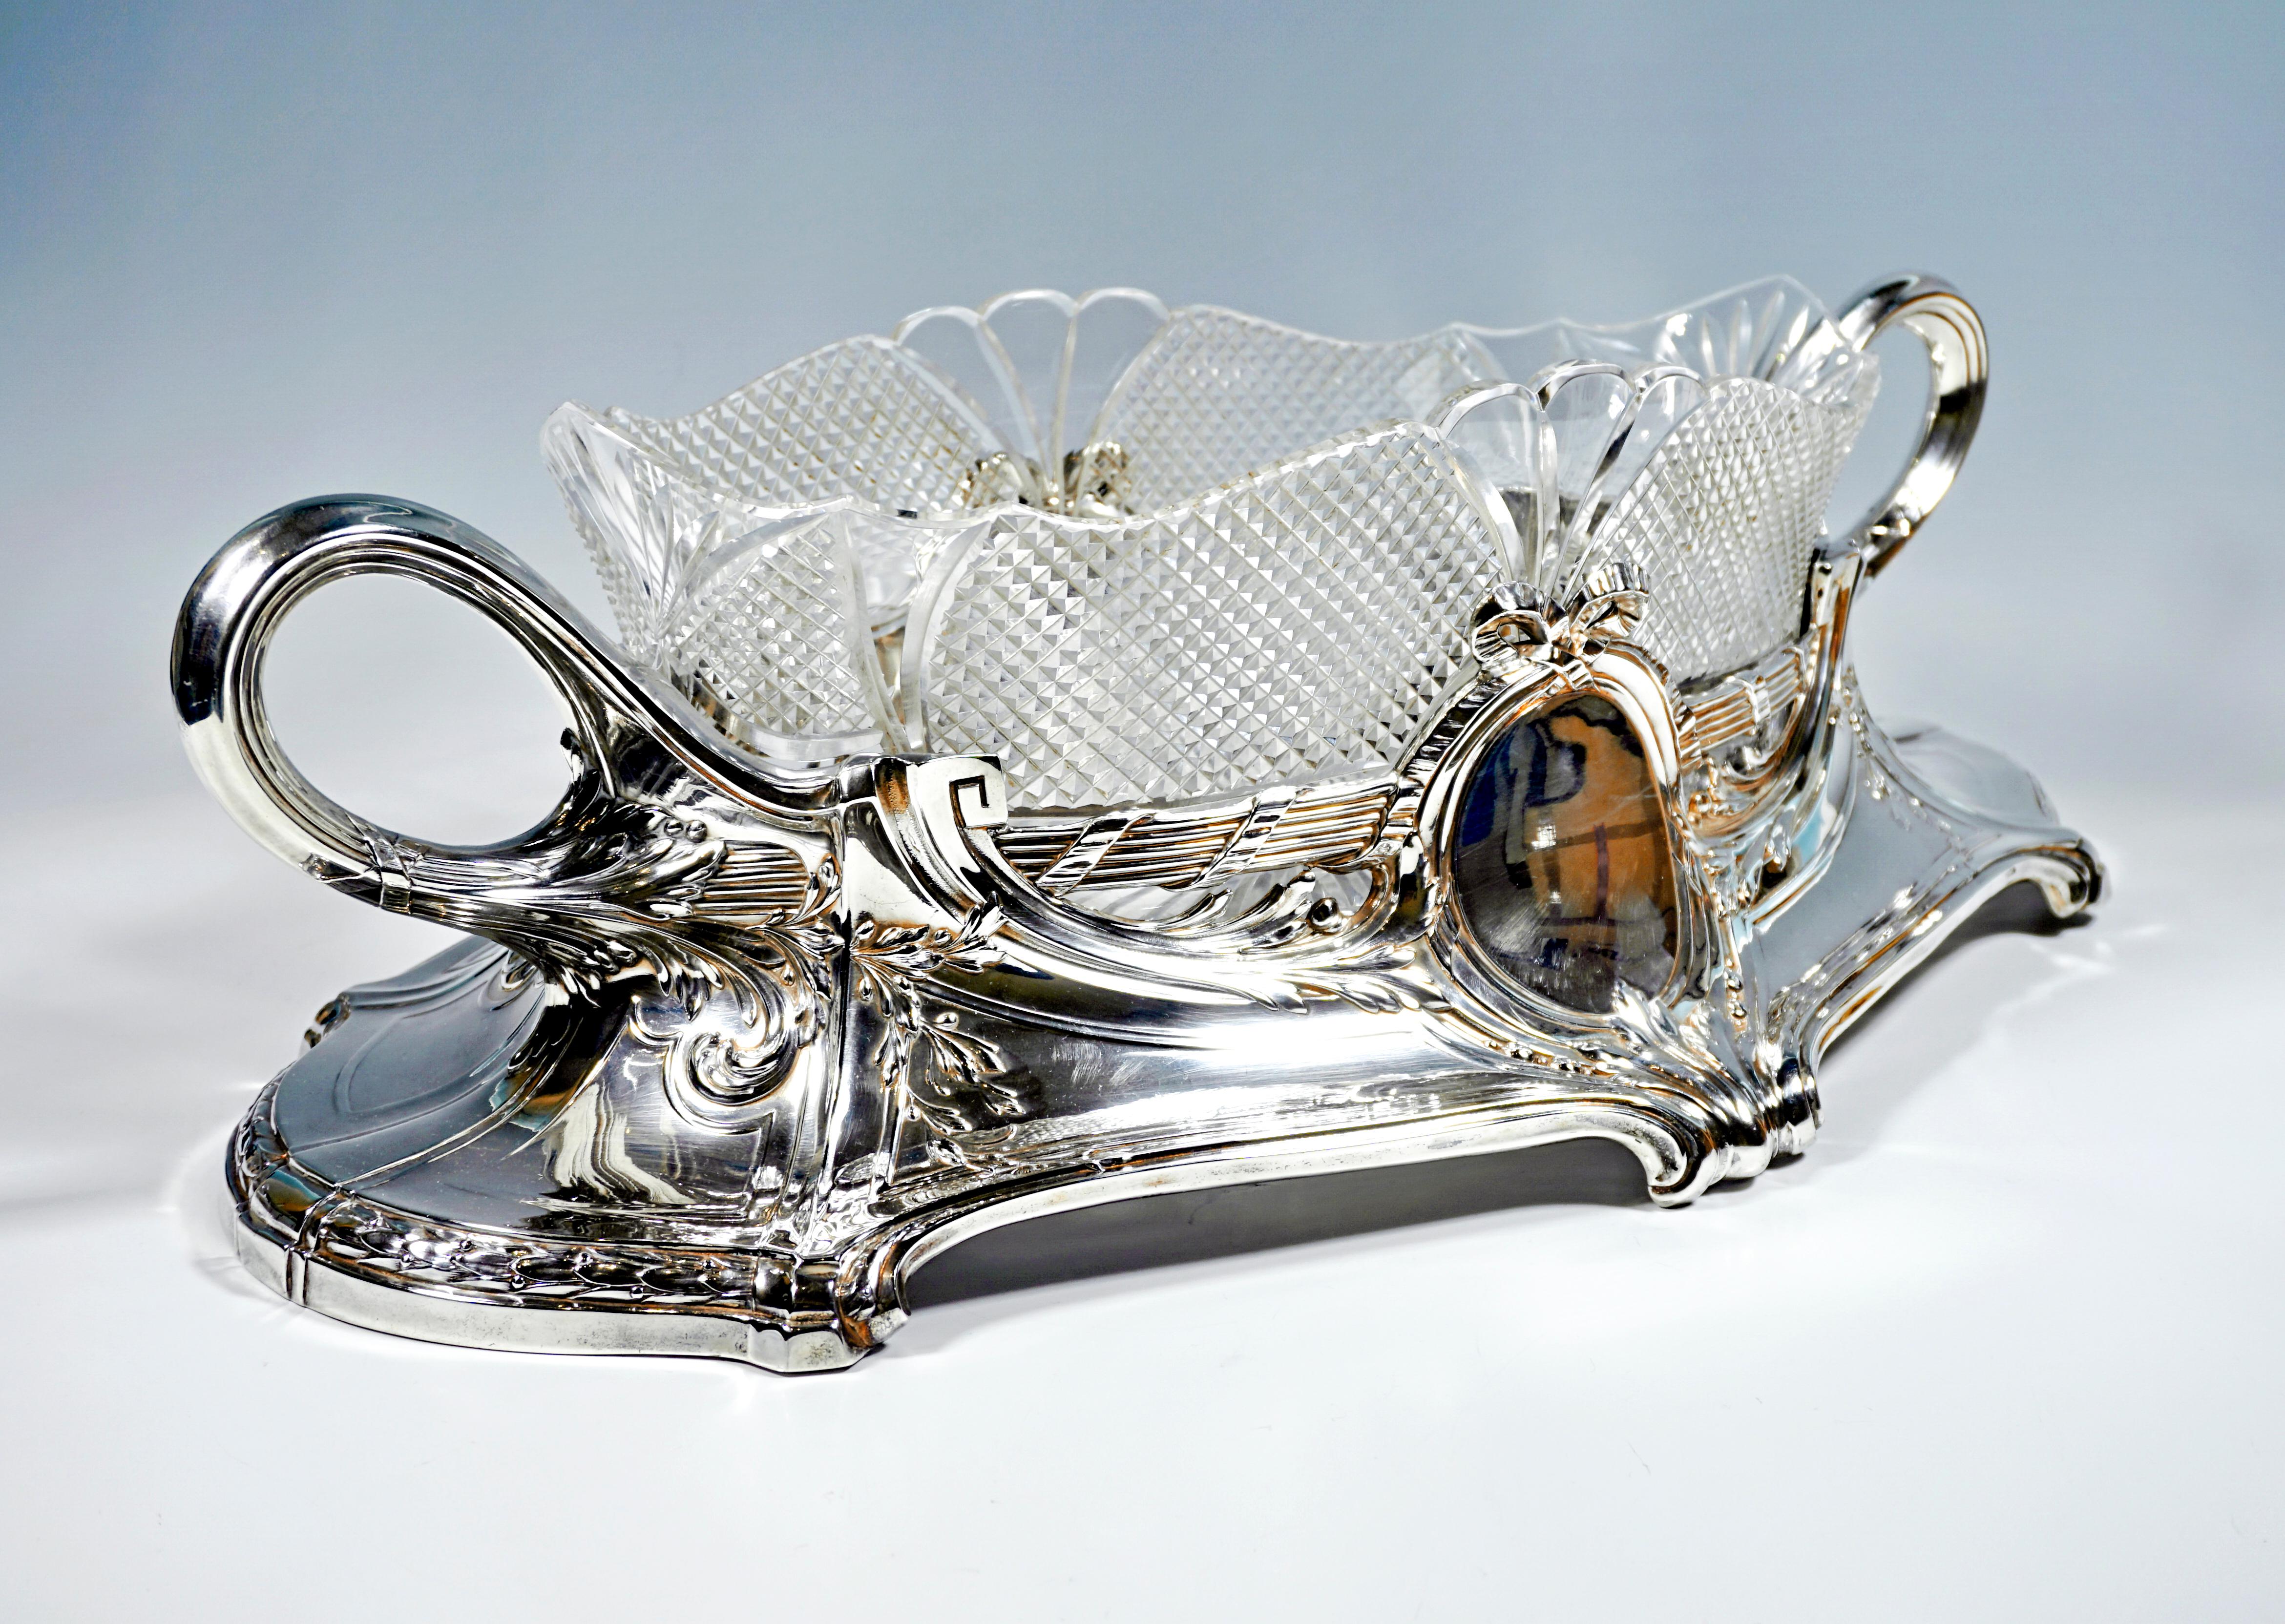 Faceted Large Art Nouveau Silver Jardiniere with Glass Liner, Wilhelm Binder, Germany